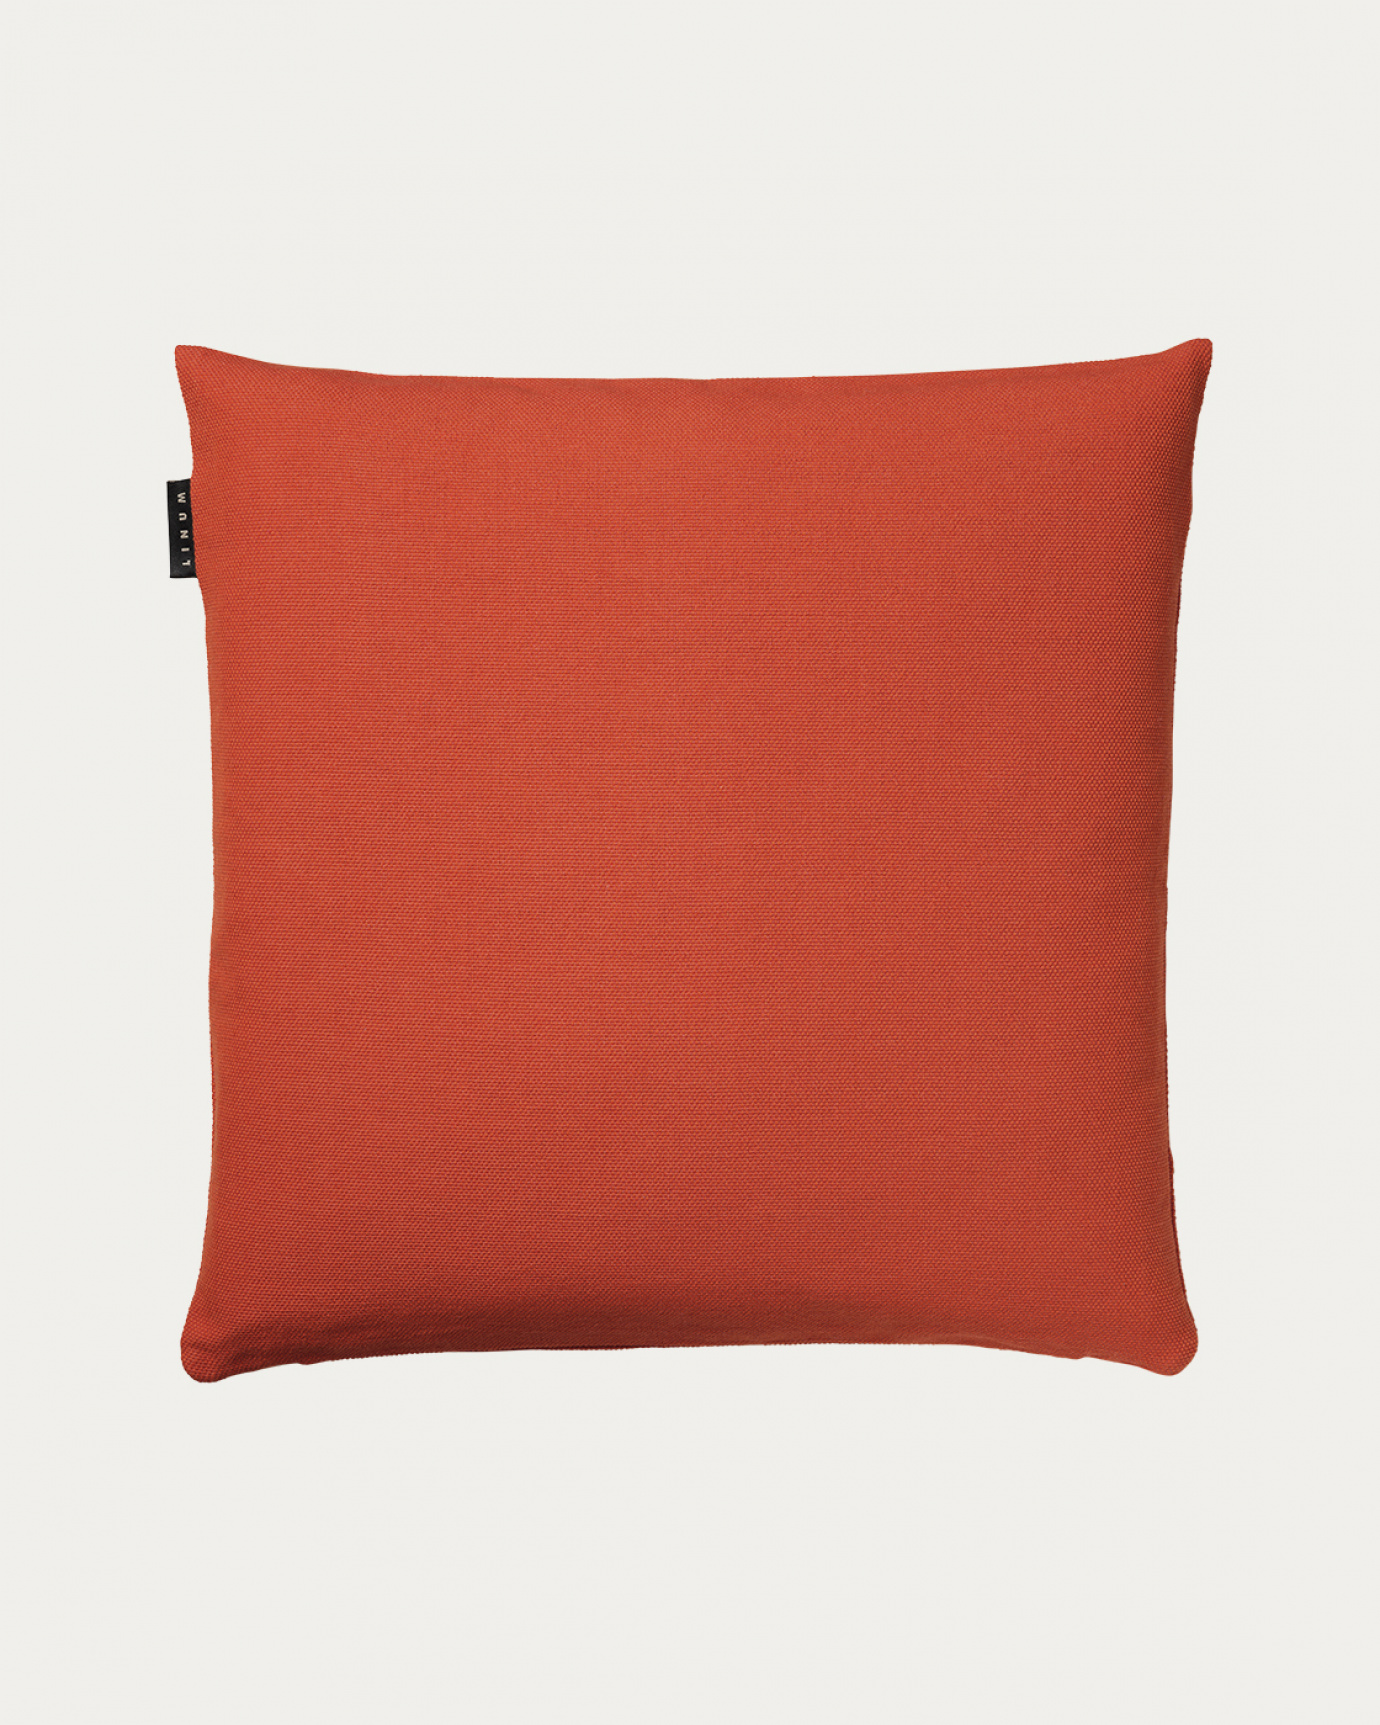 Product image rusty orange PEPPER cushion cover made of soft cotton from LINUM DESIGN. Easy to wash and durable for generations. Size 50x50 cm.